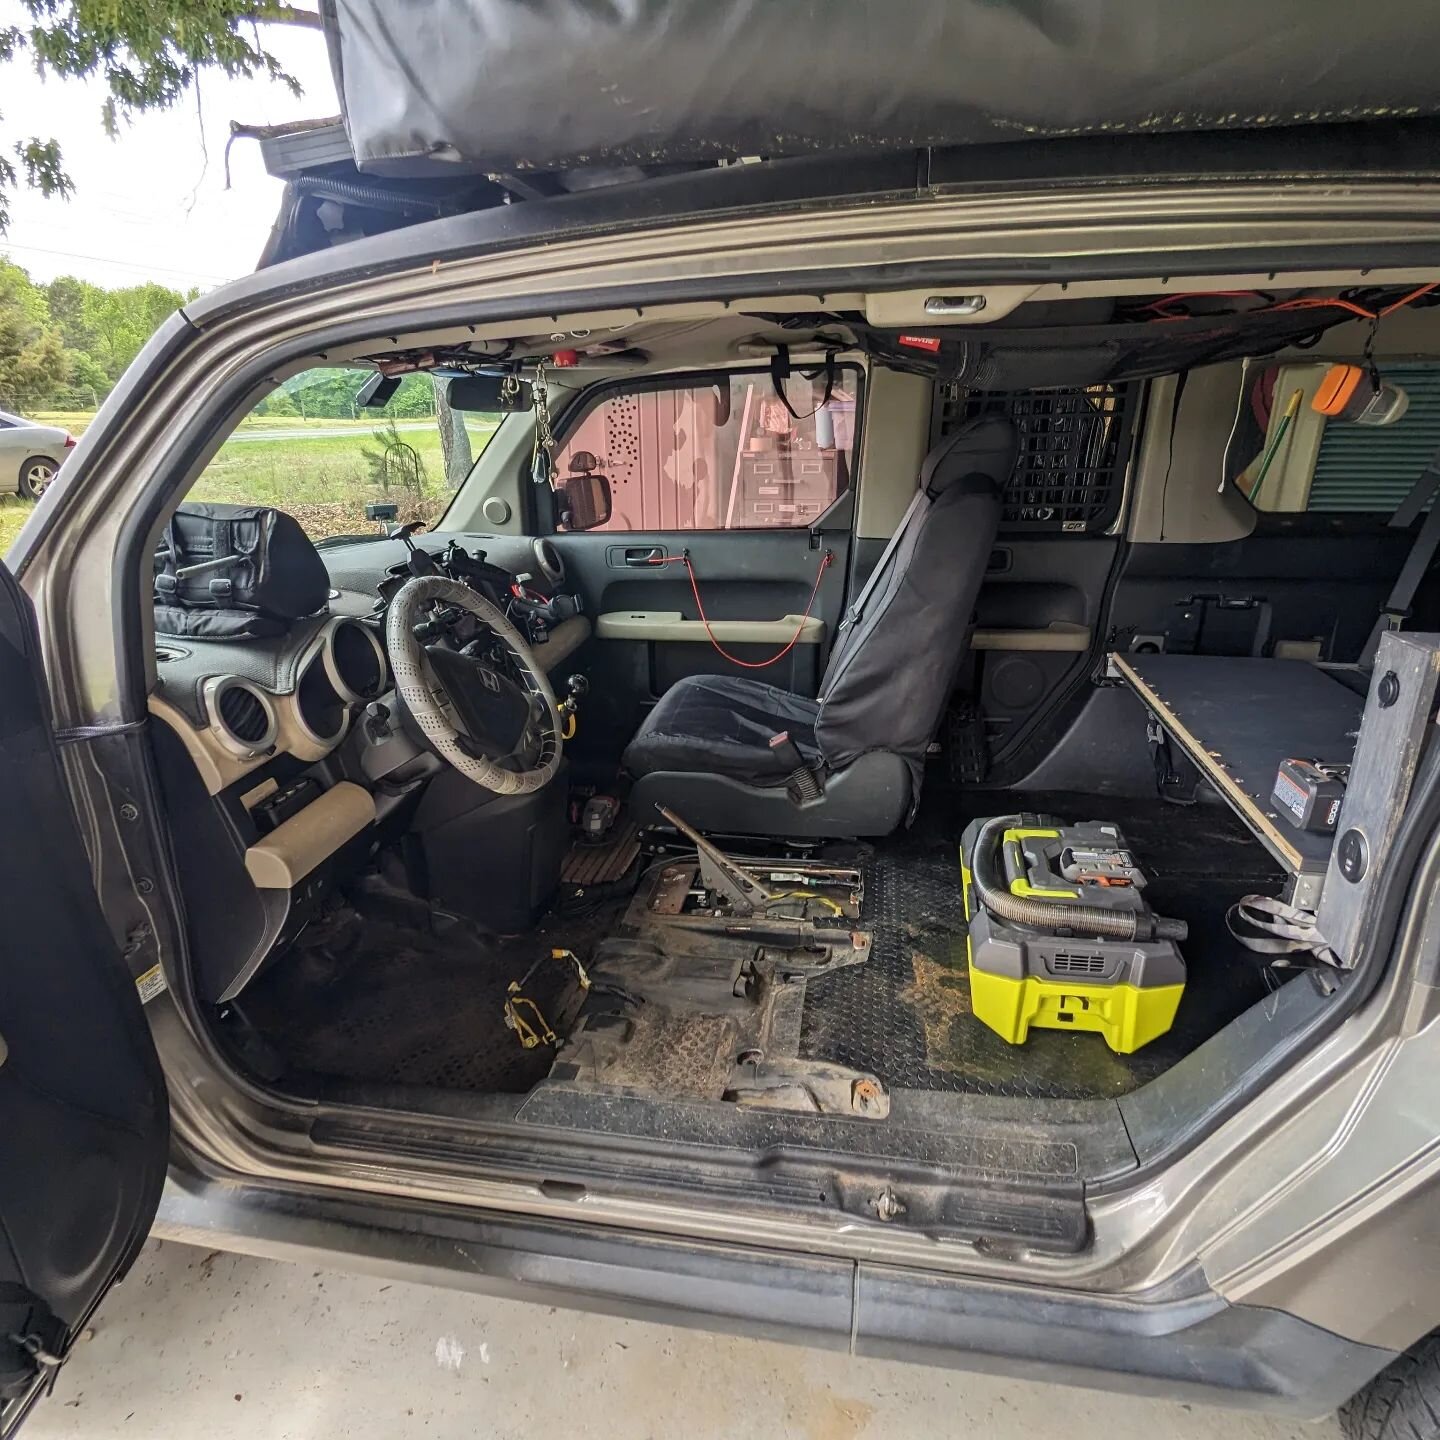 Getting started on the @hiros_hotrods 07-11 driver's side swivel, no going back from this one! 🤘

#honda #hondaelementownersclub #campingelement #hondaelement #carcampinghacks #carcamping